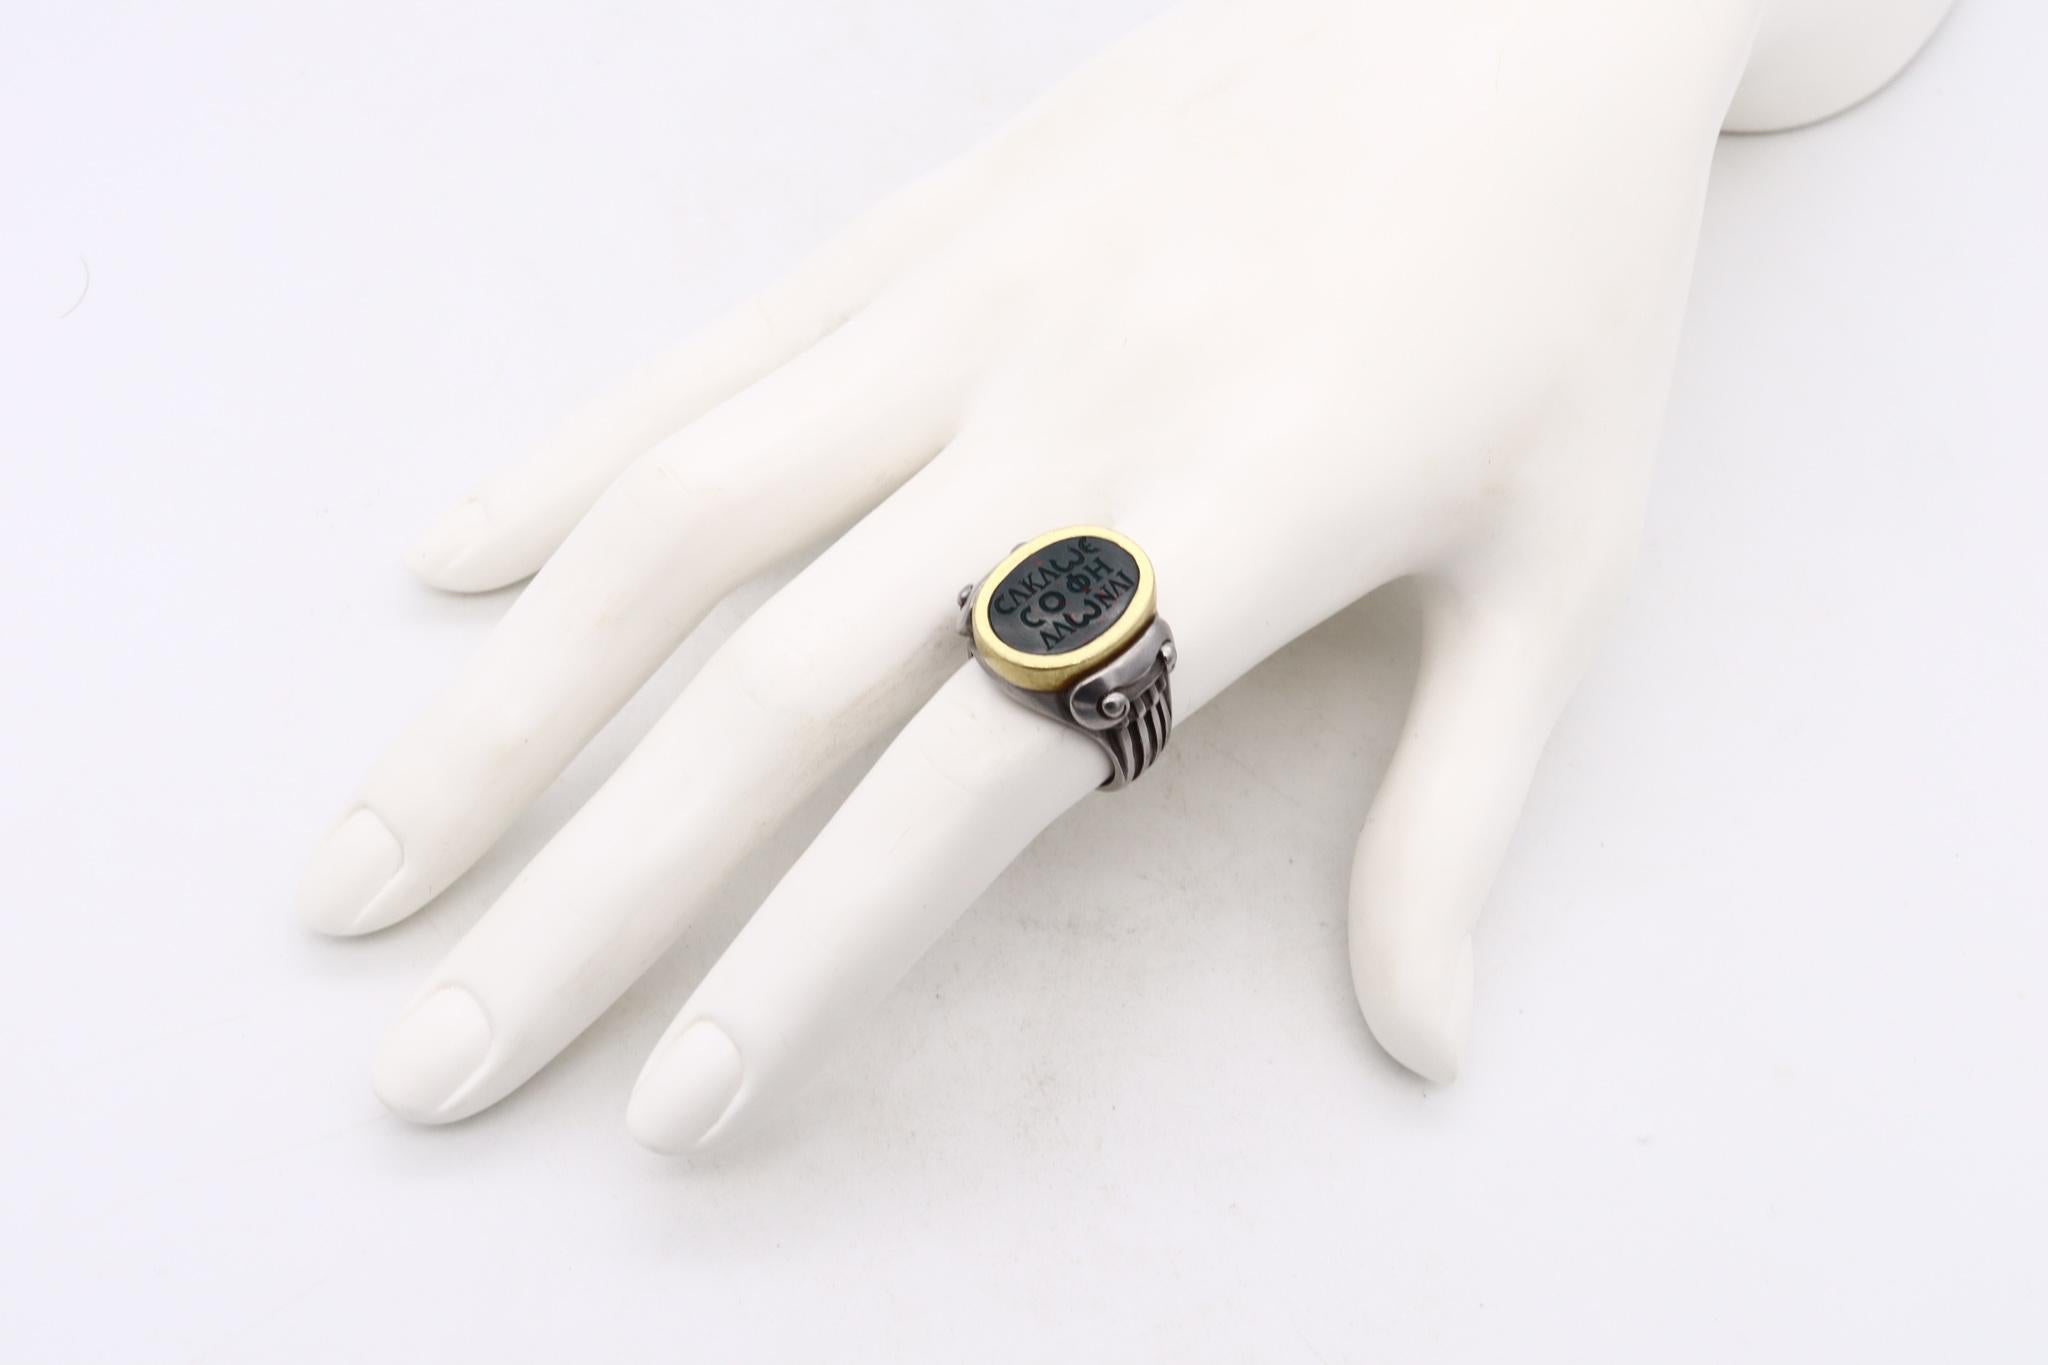 A signet intaglio ring designed by Kieselstein-Cord

A neo-classical iconic ring, created in New York city in the 2000 by the jewelry atelier of Kieselstein-Cord, It was crafted with Greek revival patterns, in solid yellow gold of 18 karats and